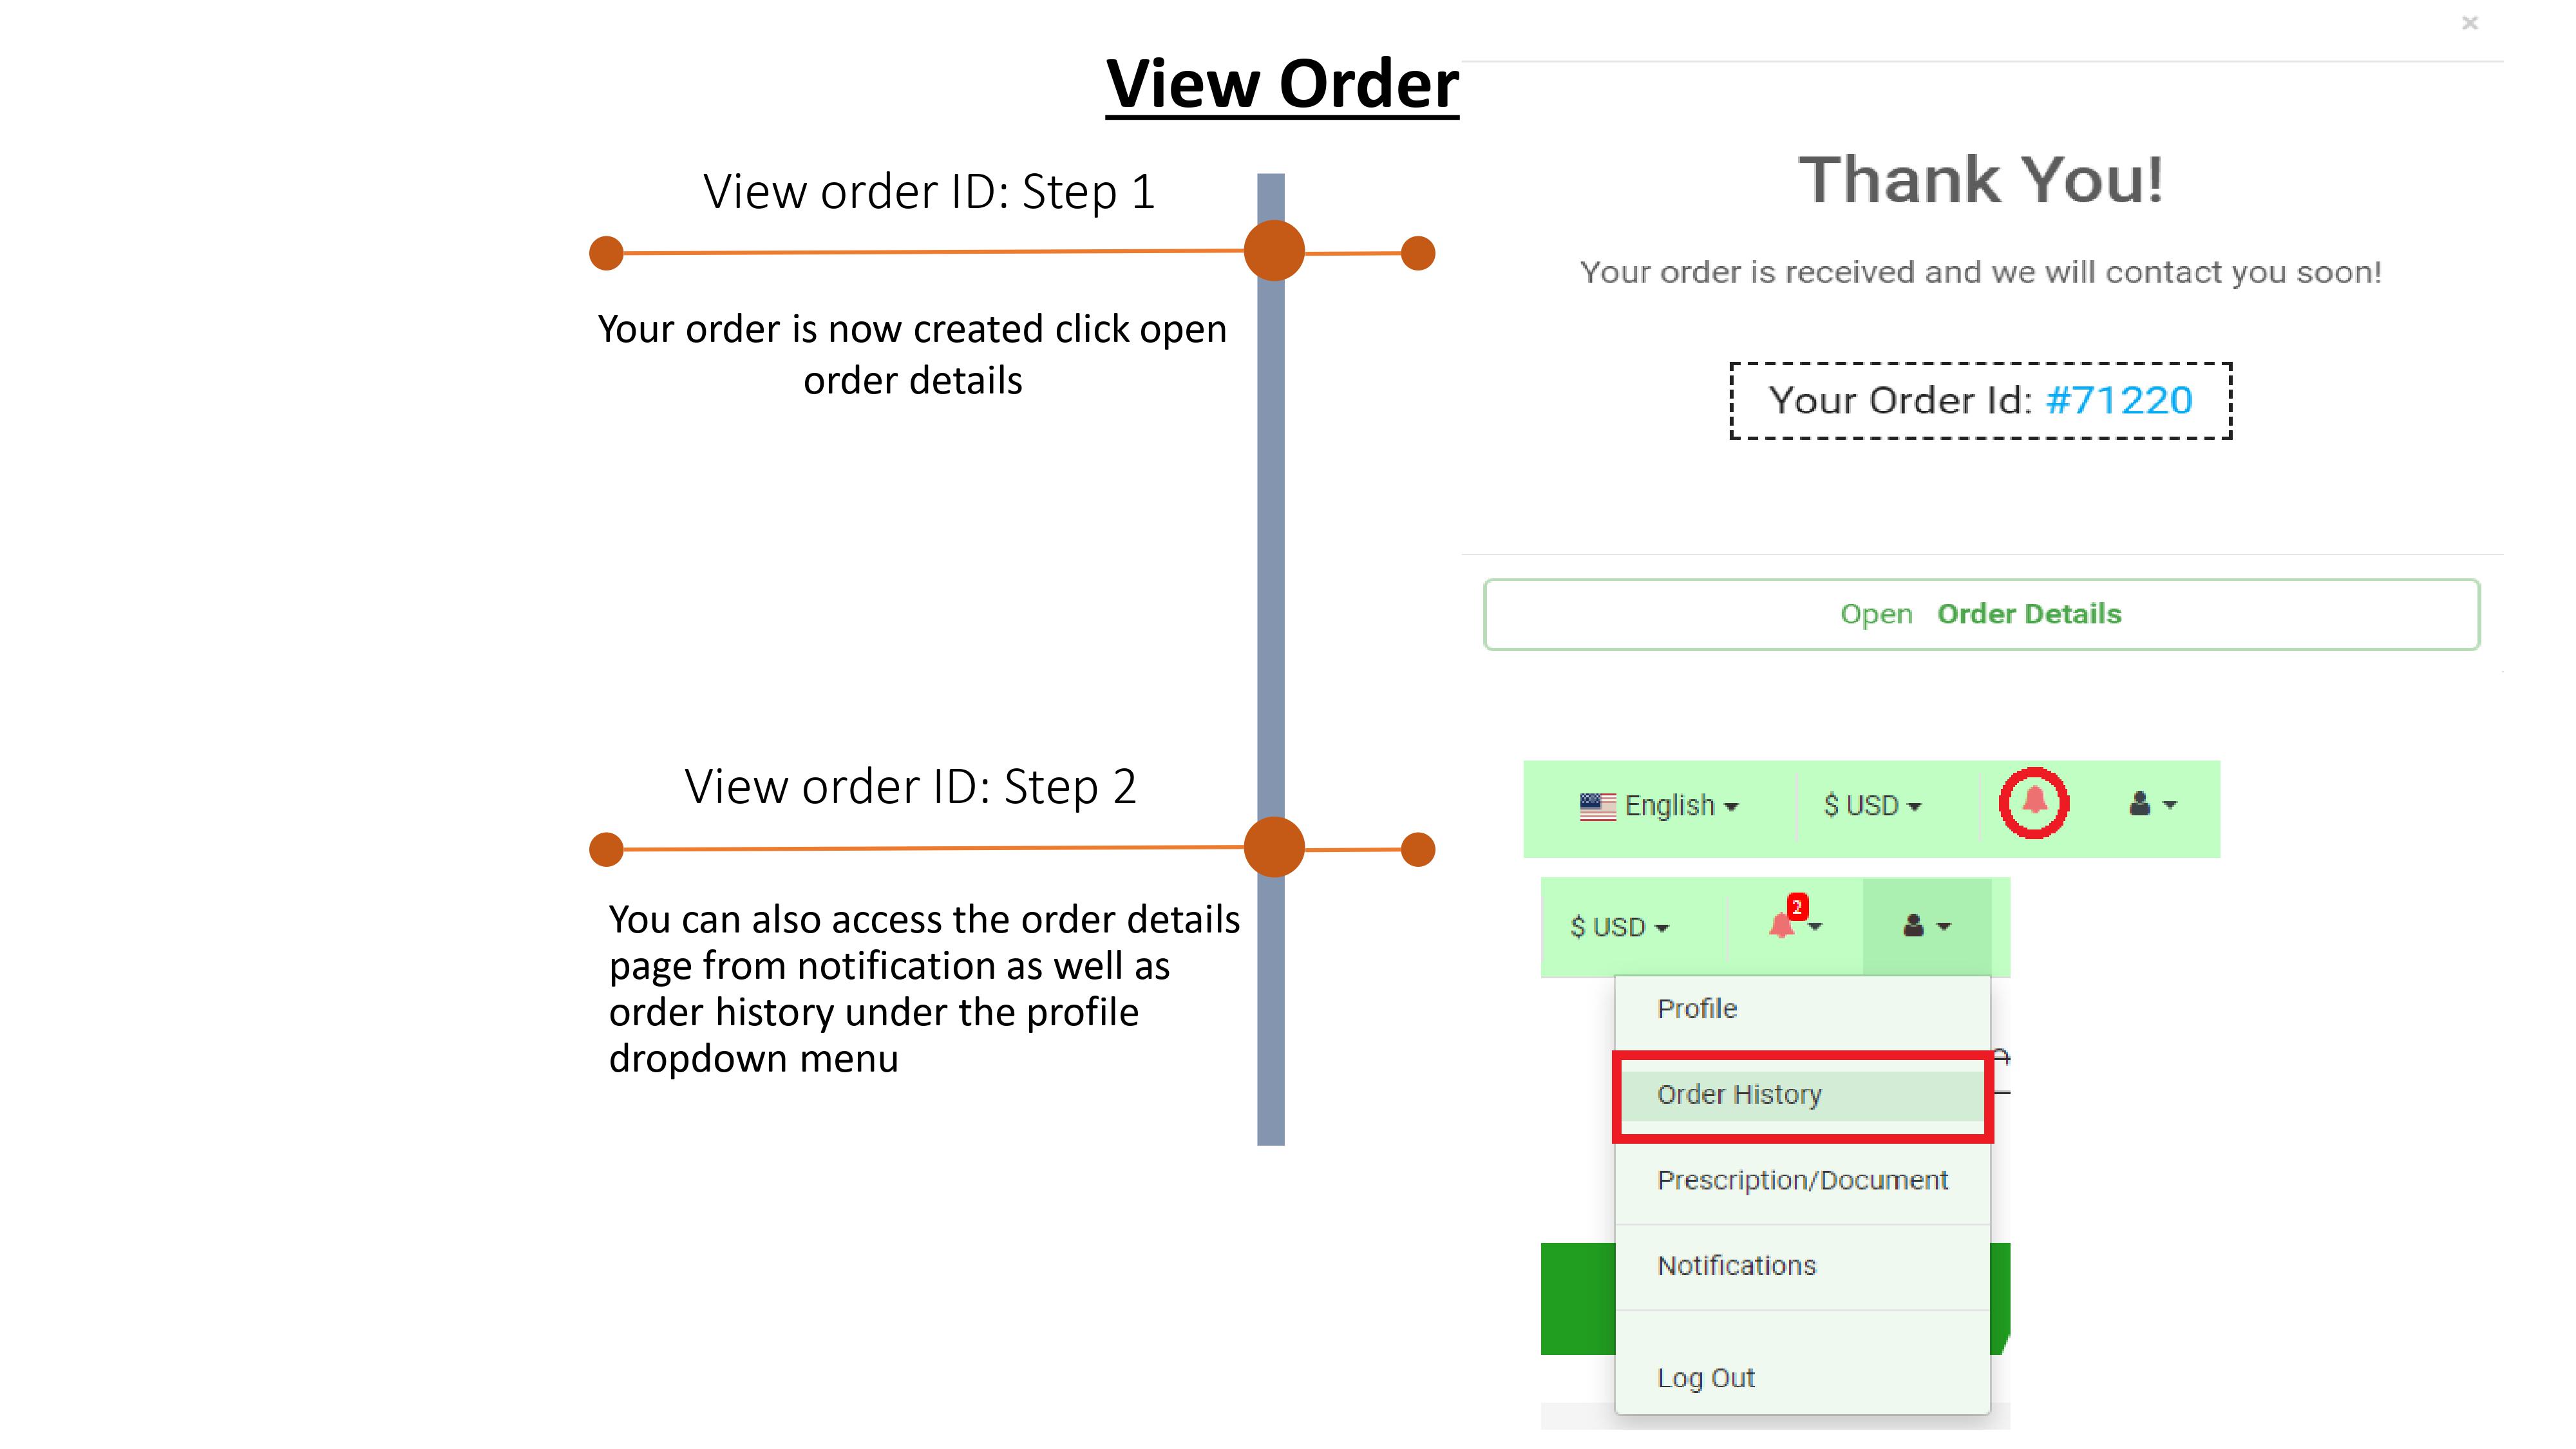 view order 1